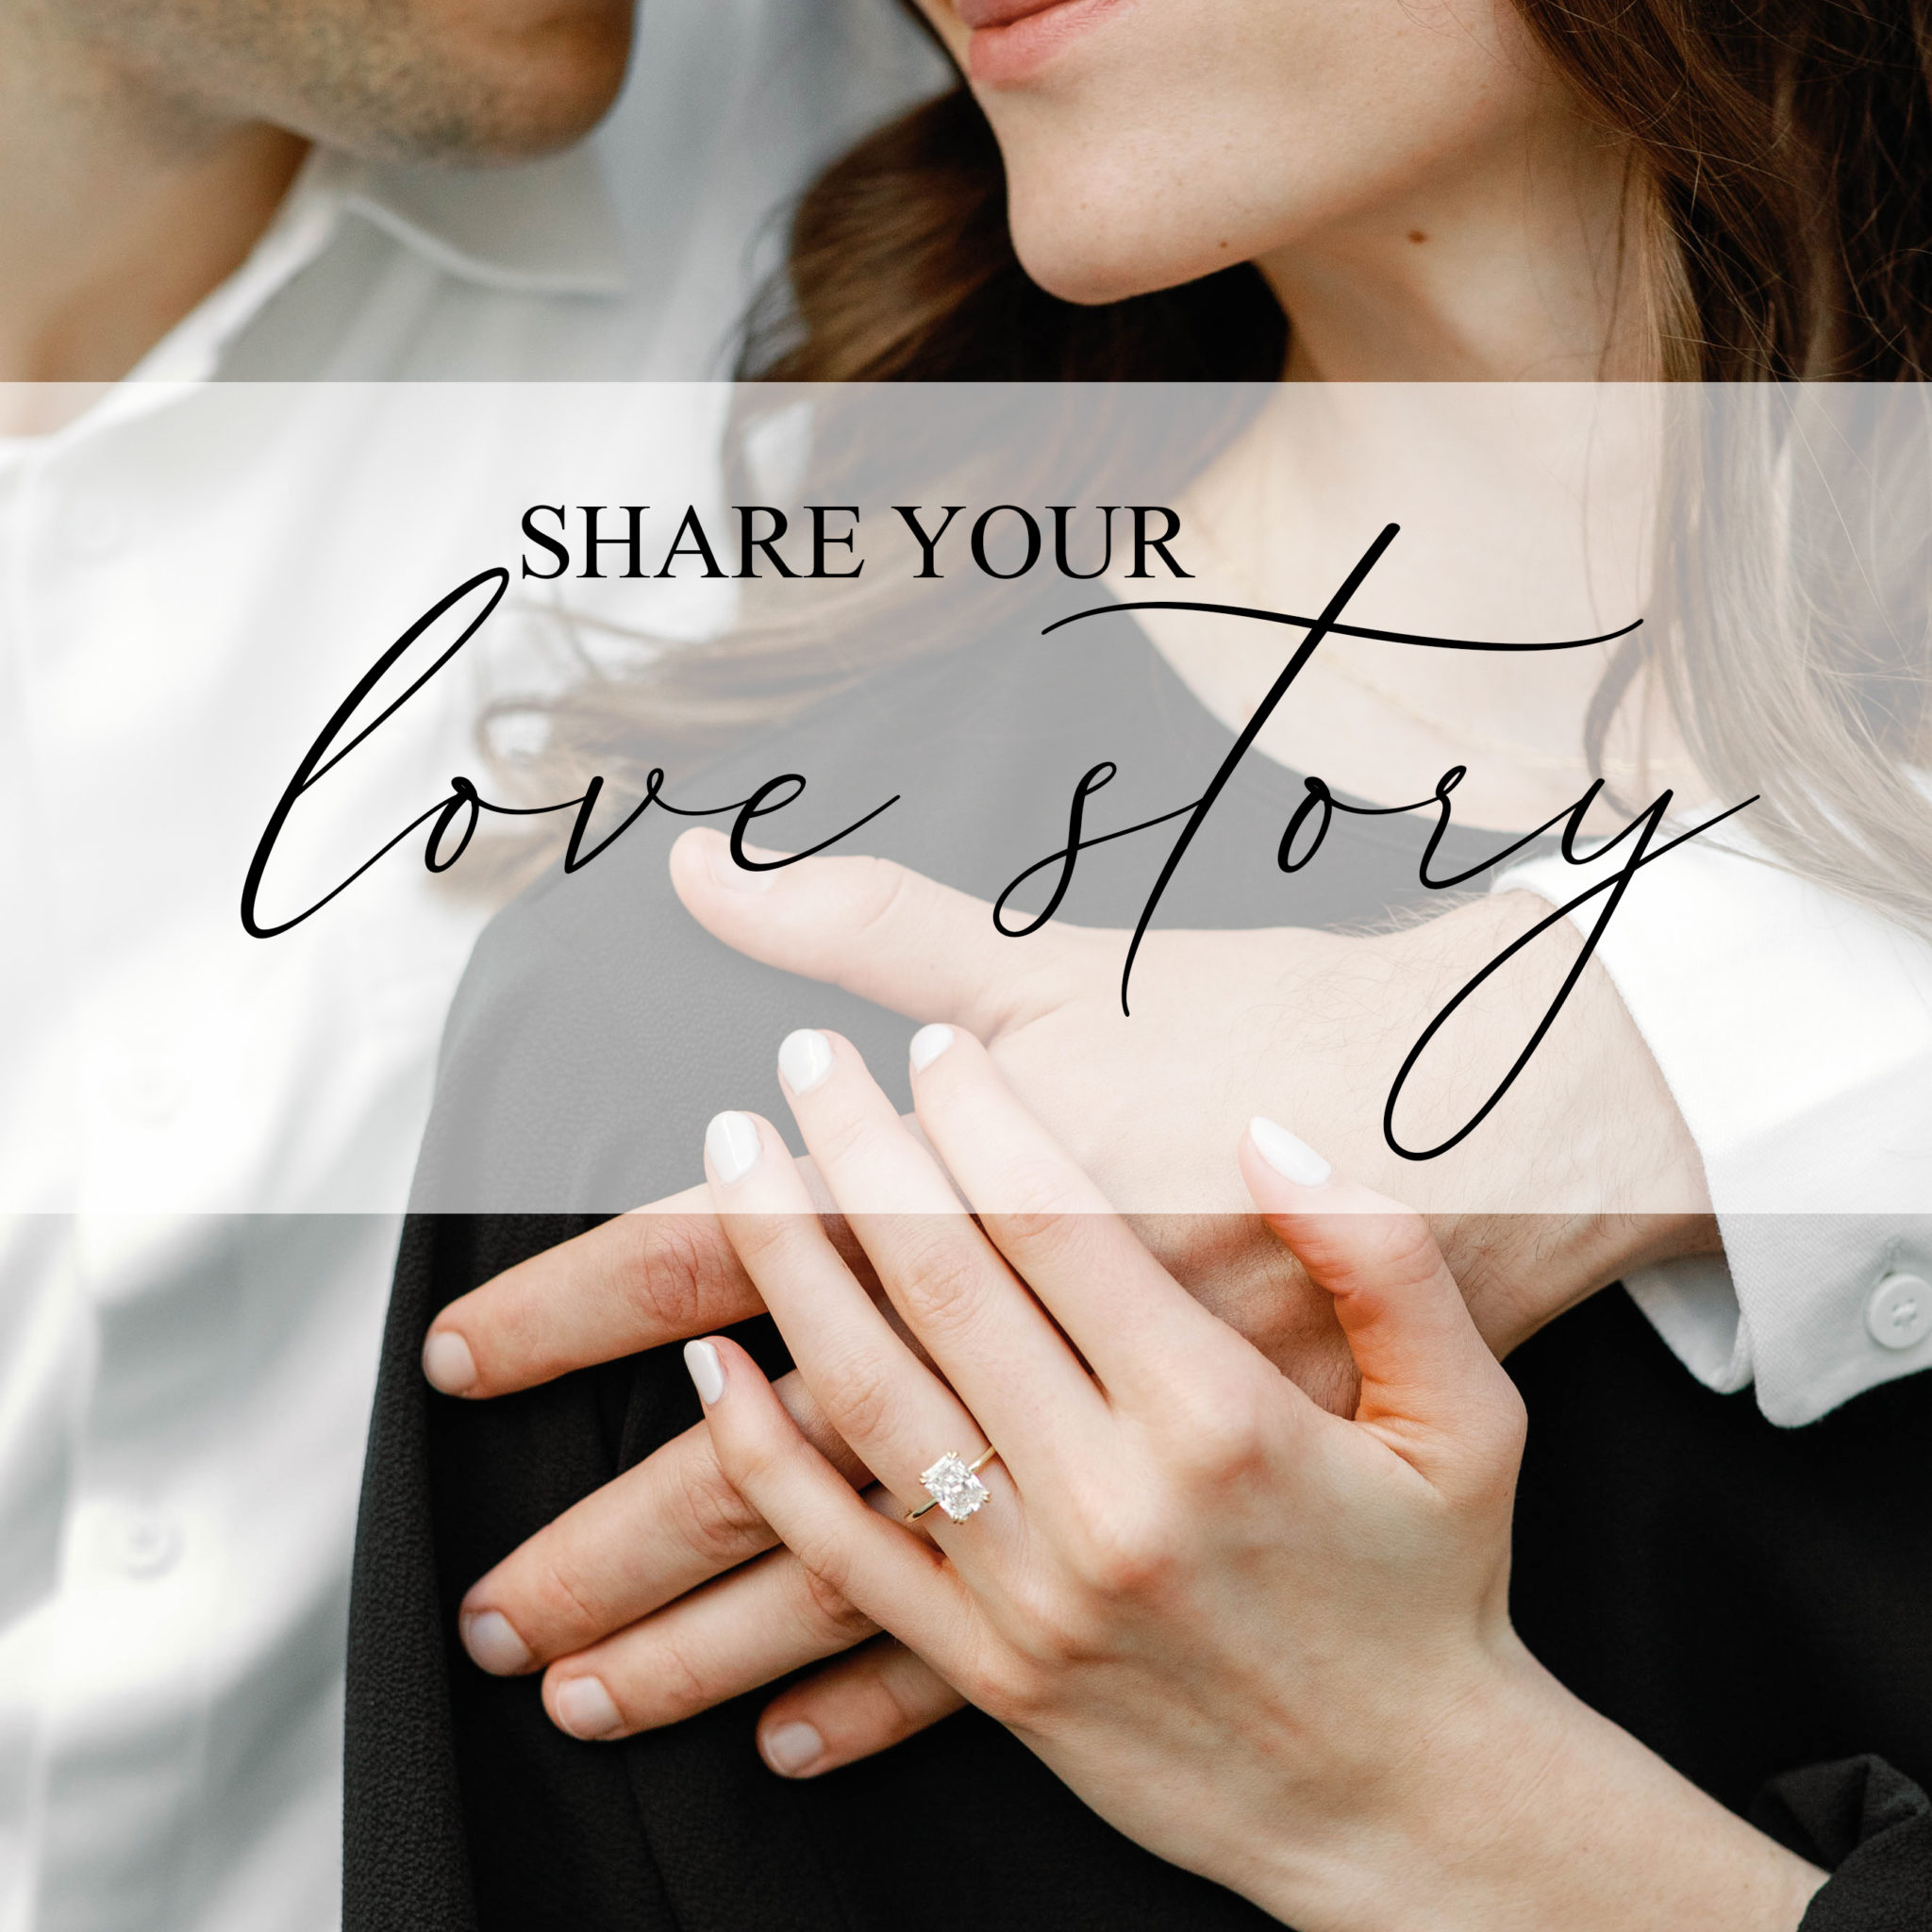 Share Your Love Story